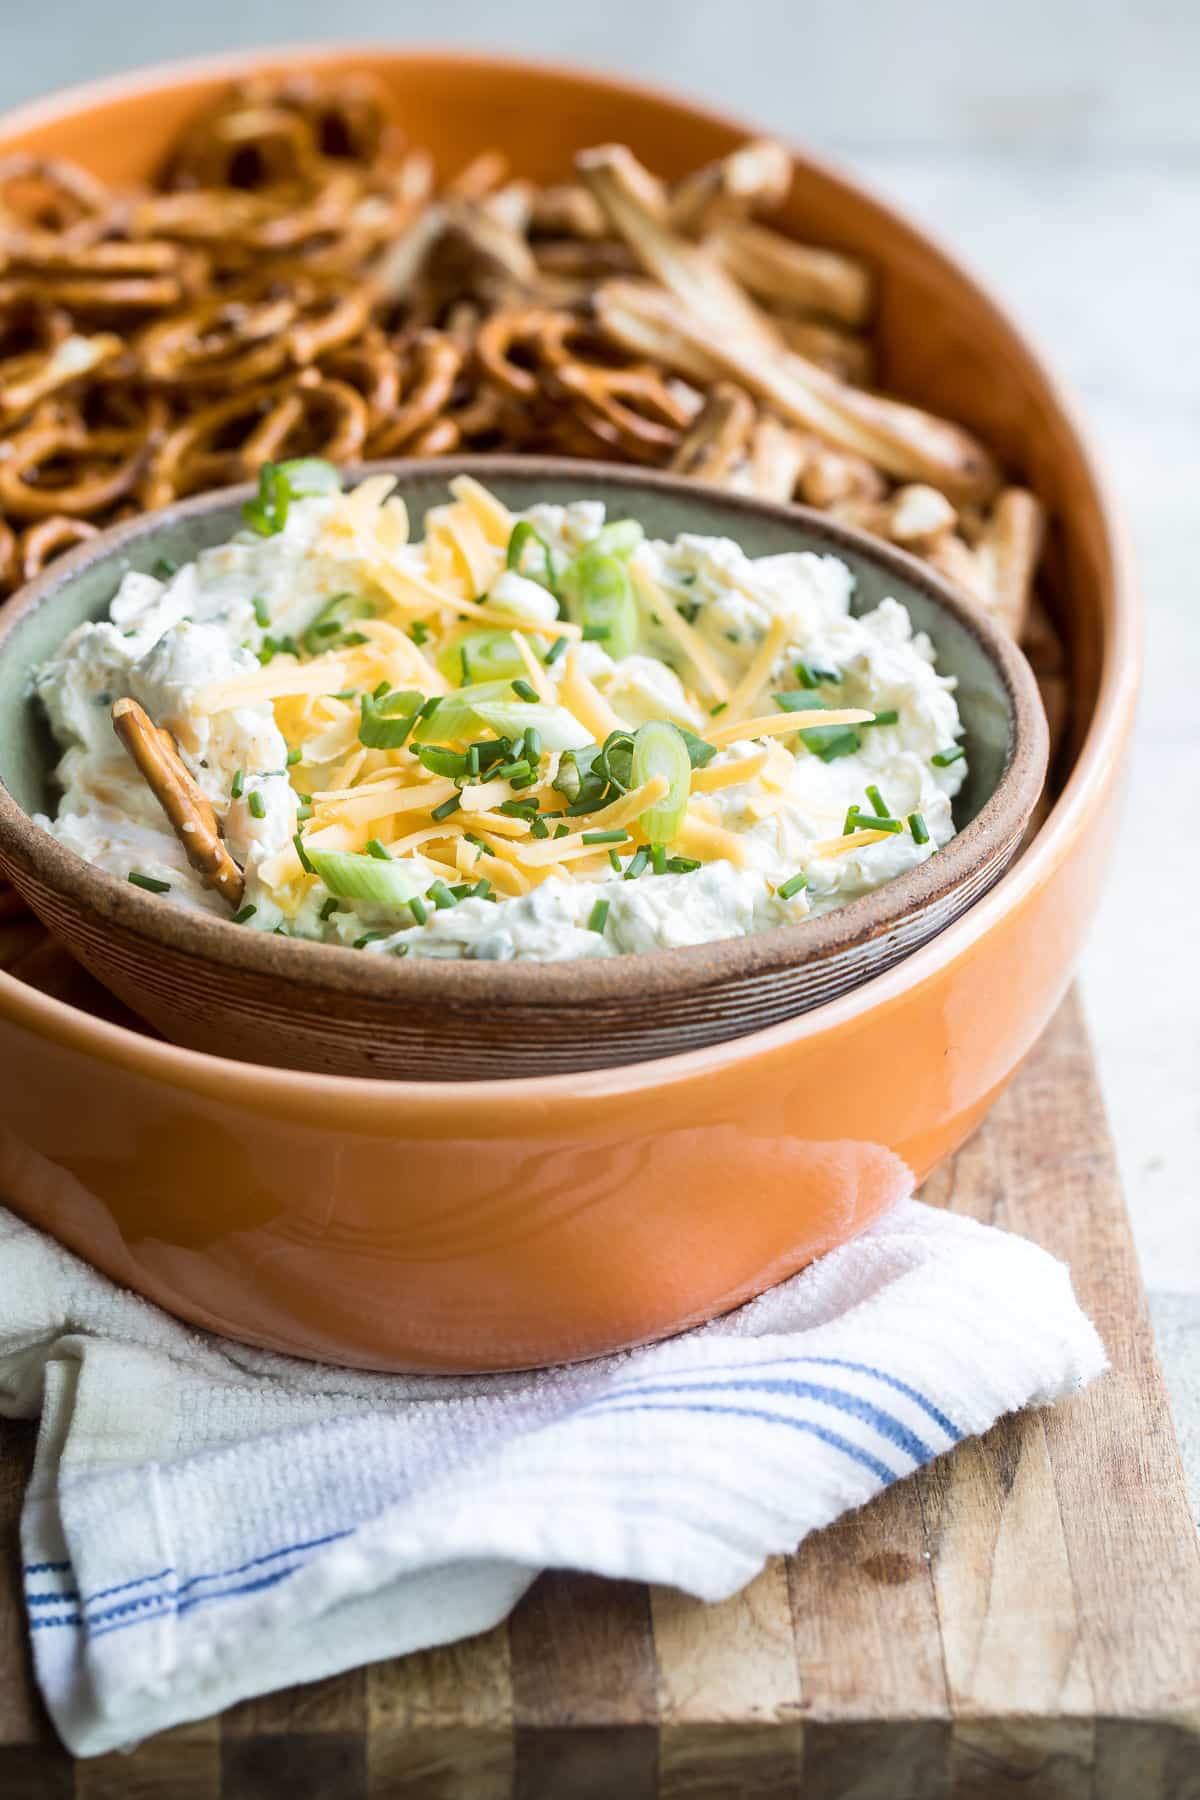 Beer cheese dip in a bowl with pretzels.